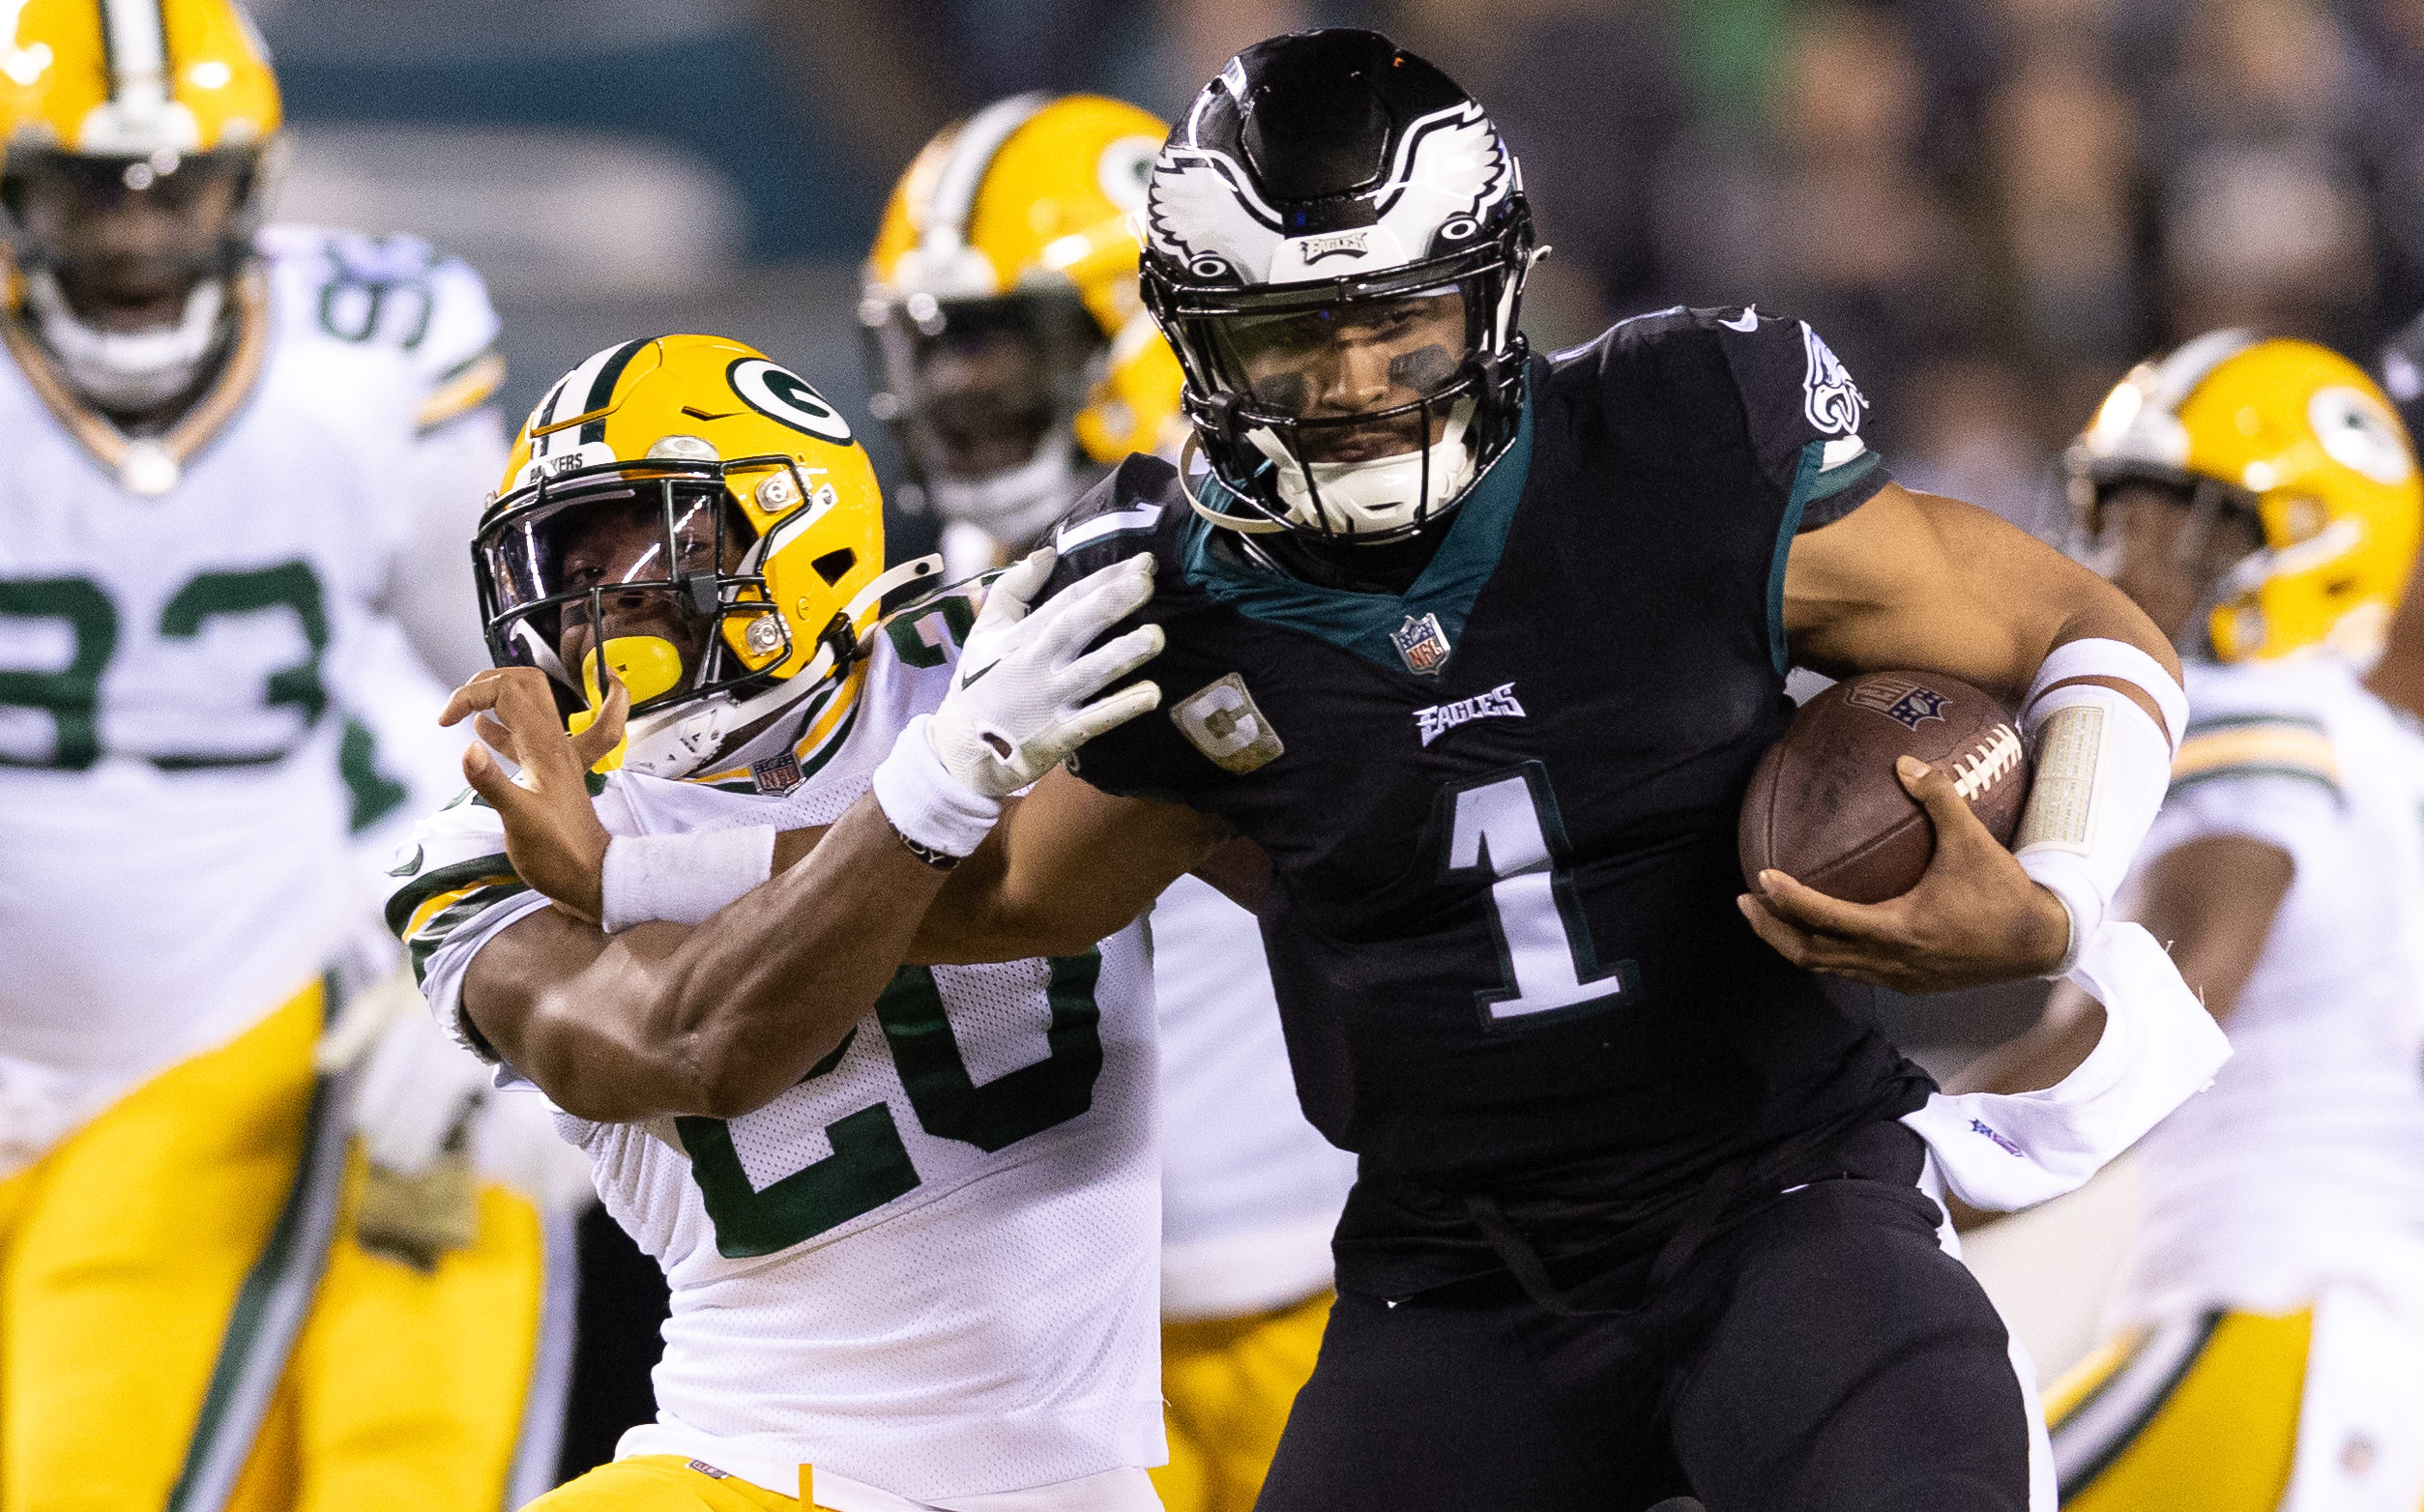 2023 NFL Betting: When to Bet on Packers, Eagles, Other Win Totals